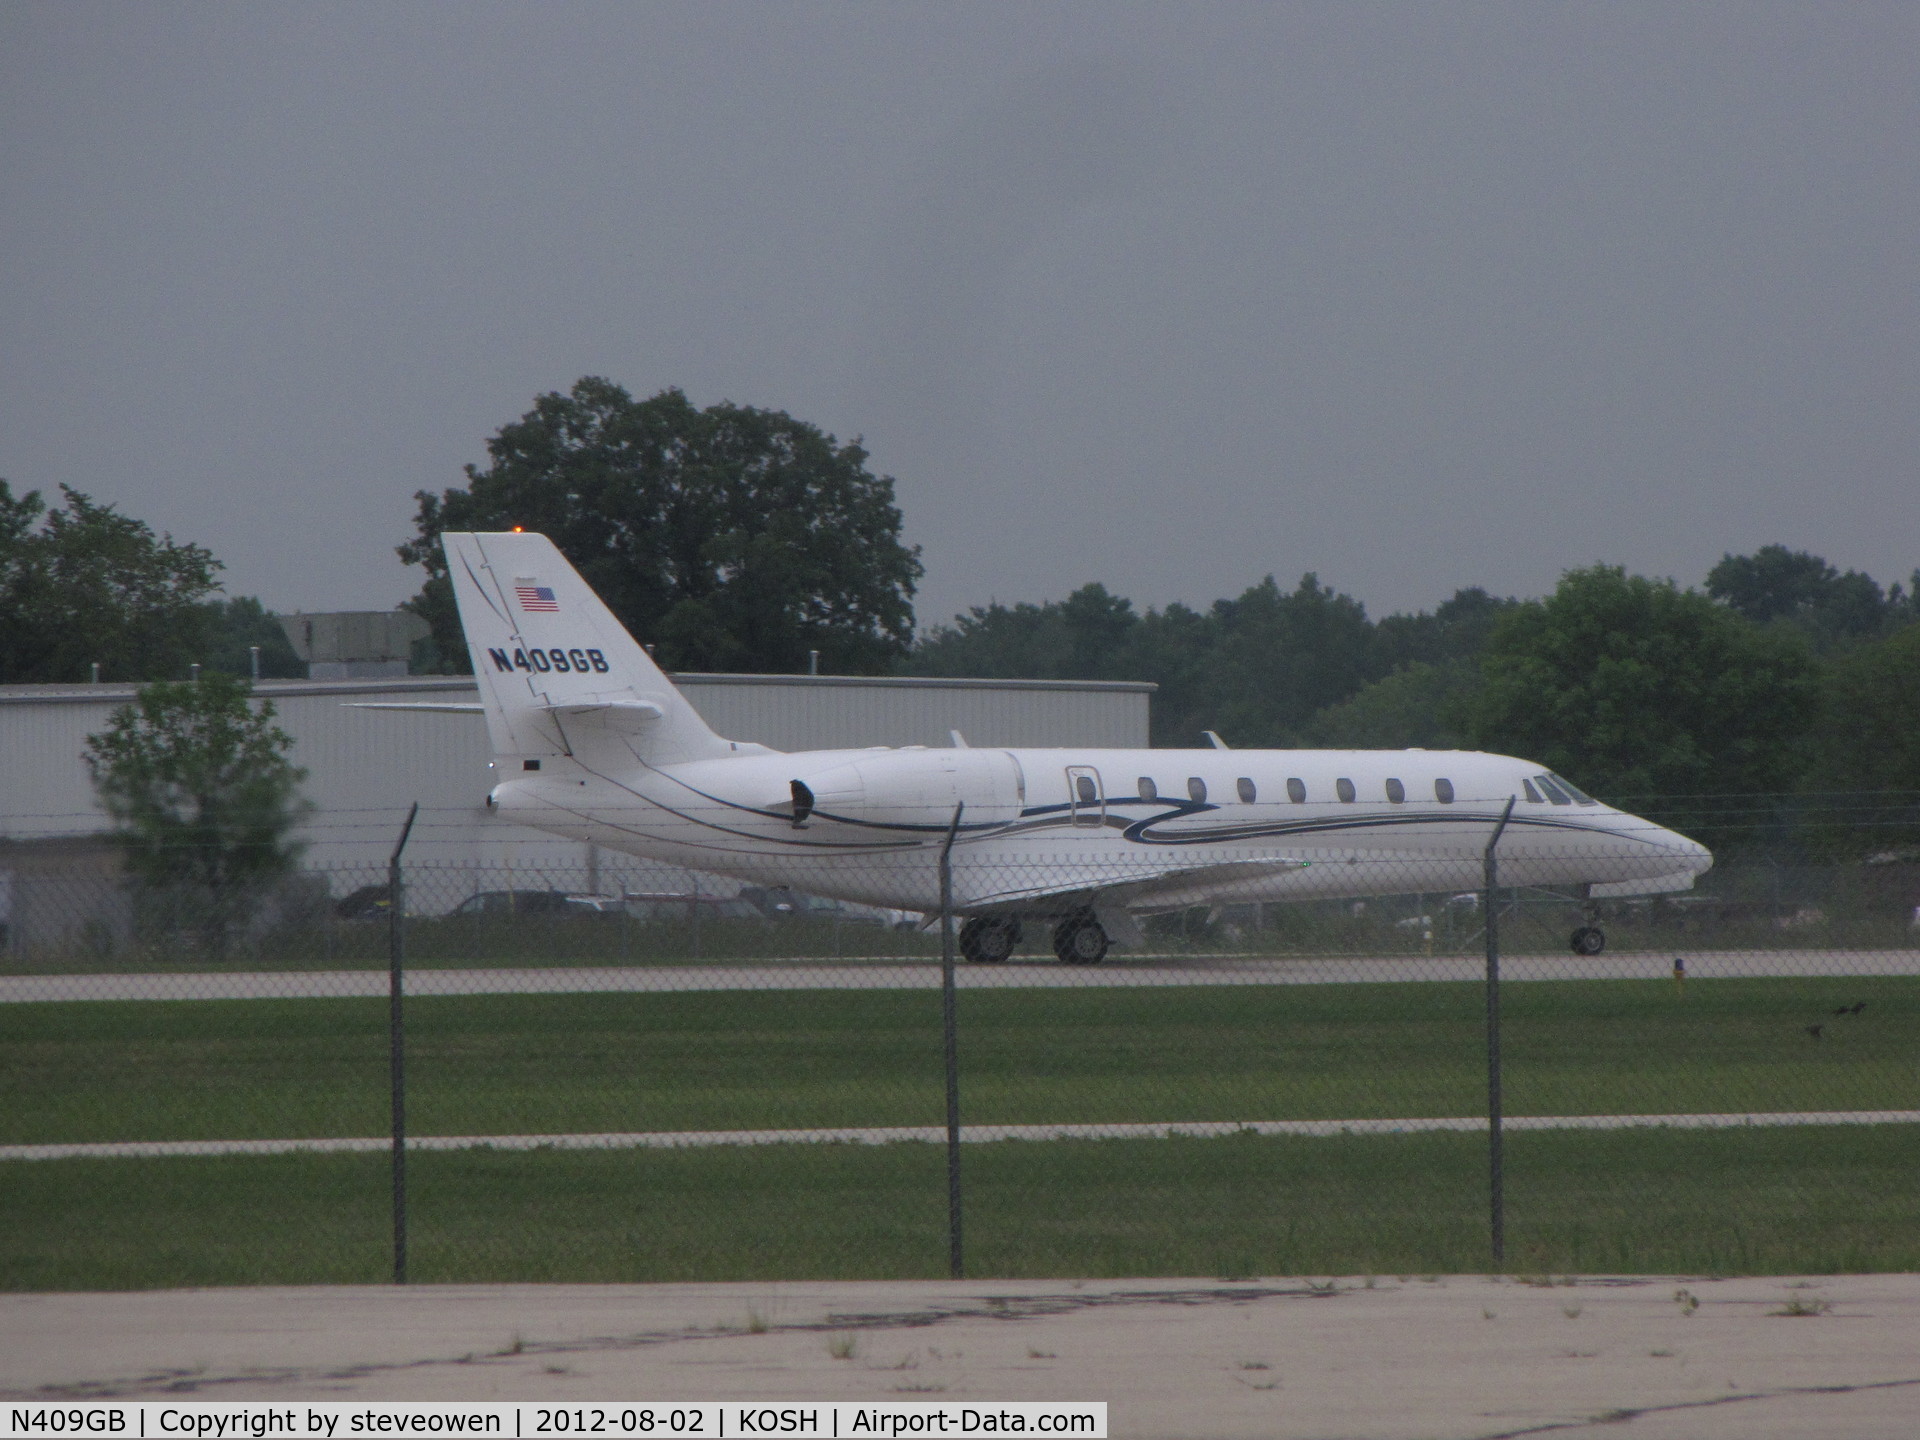 N409GB, 2004 Cessna 680 Citation Sovereign C/N 680-0006, Taxing out at Oshkosh